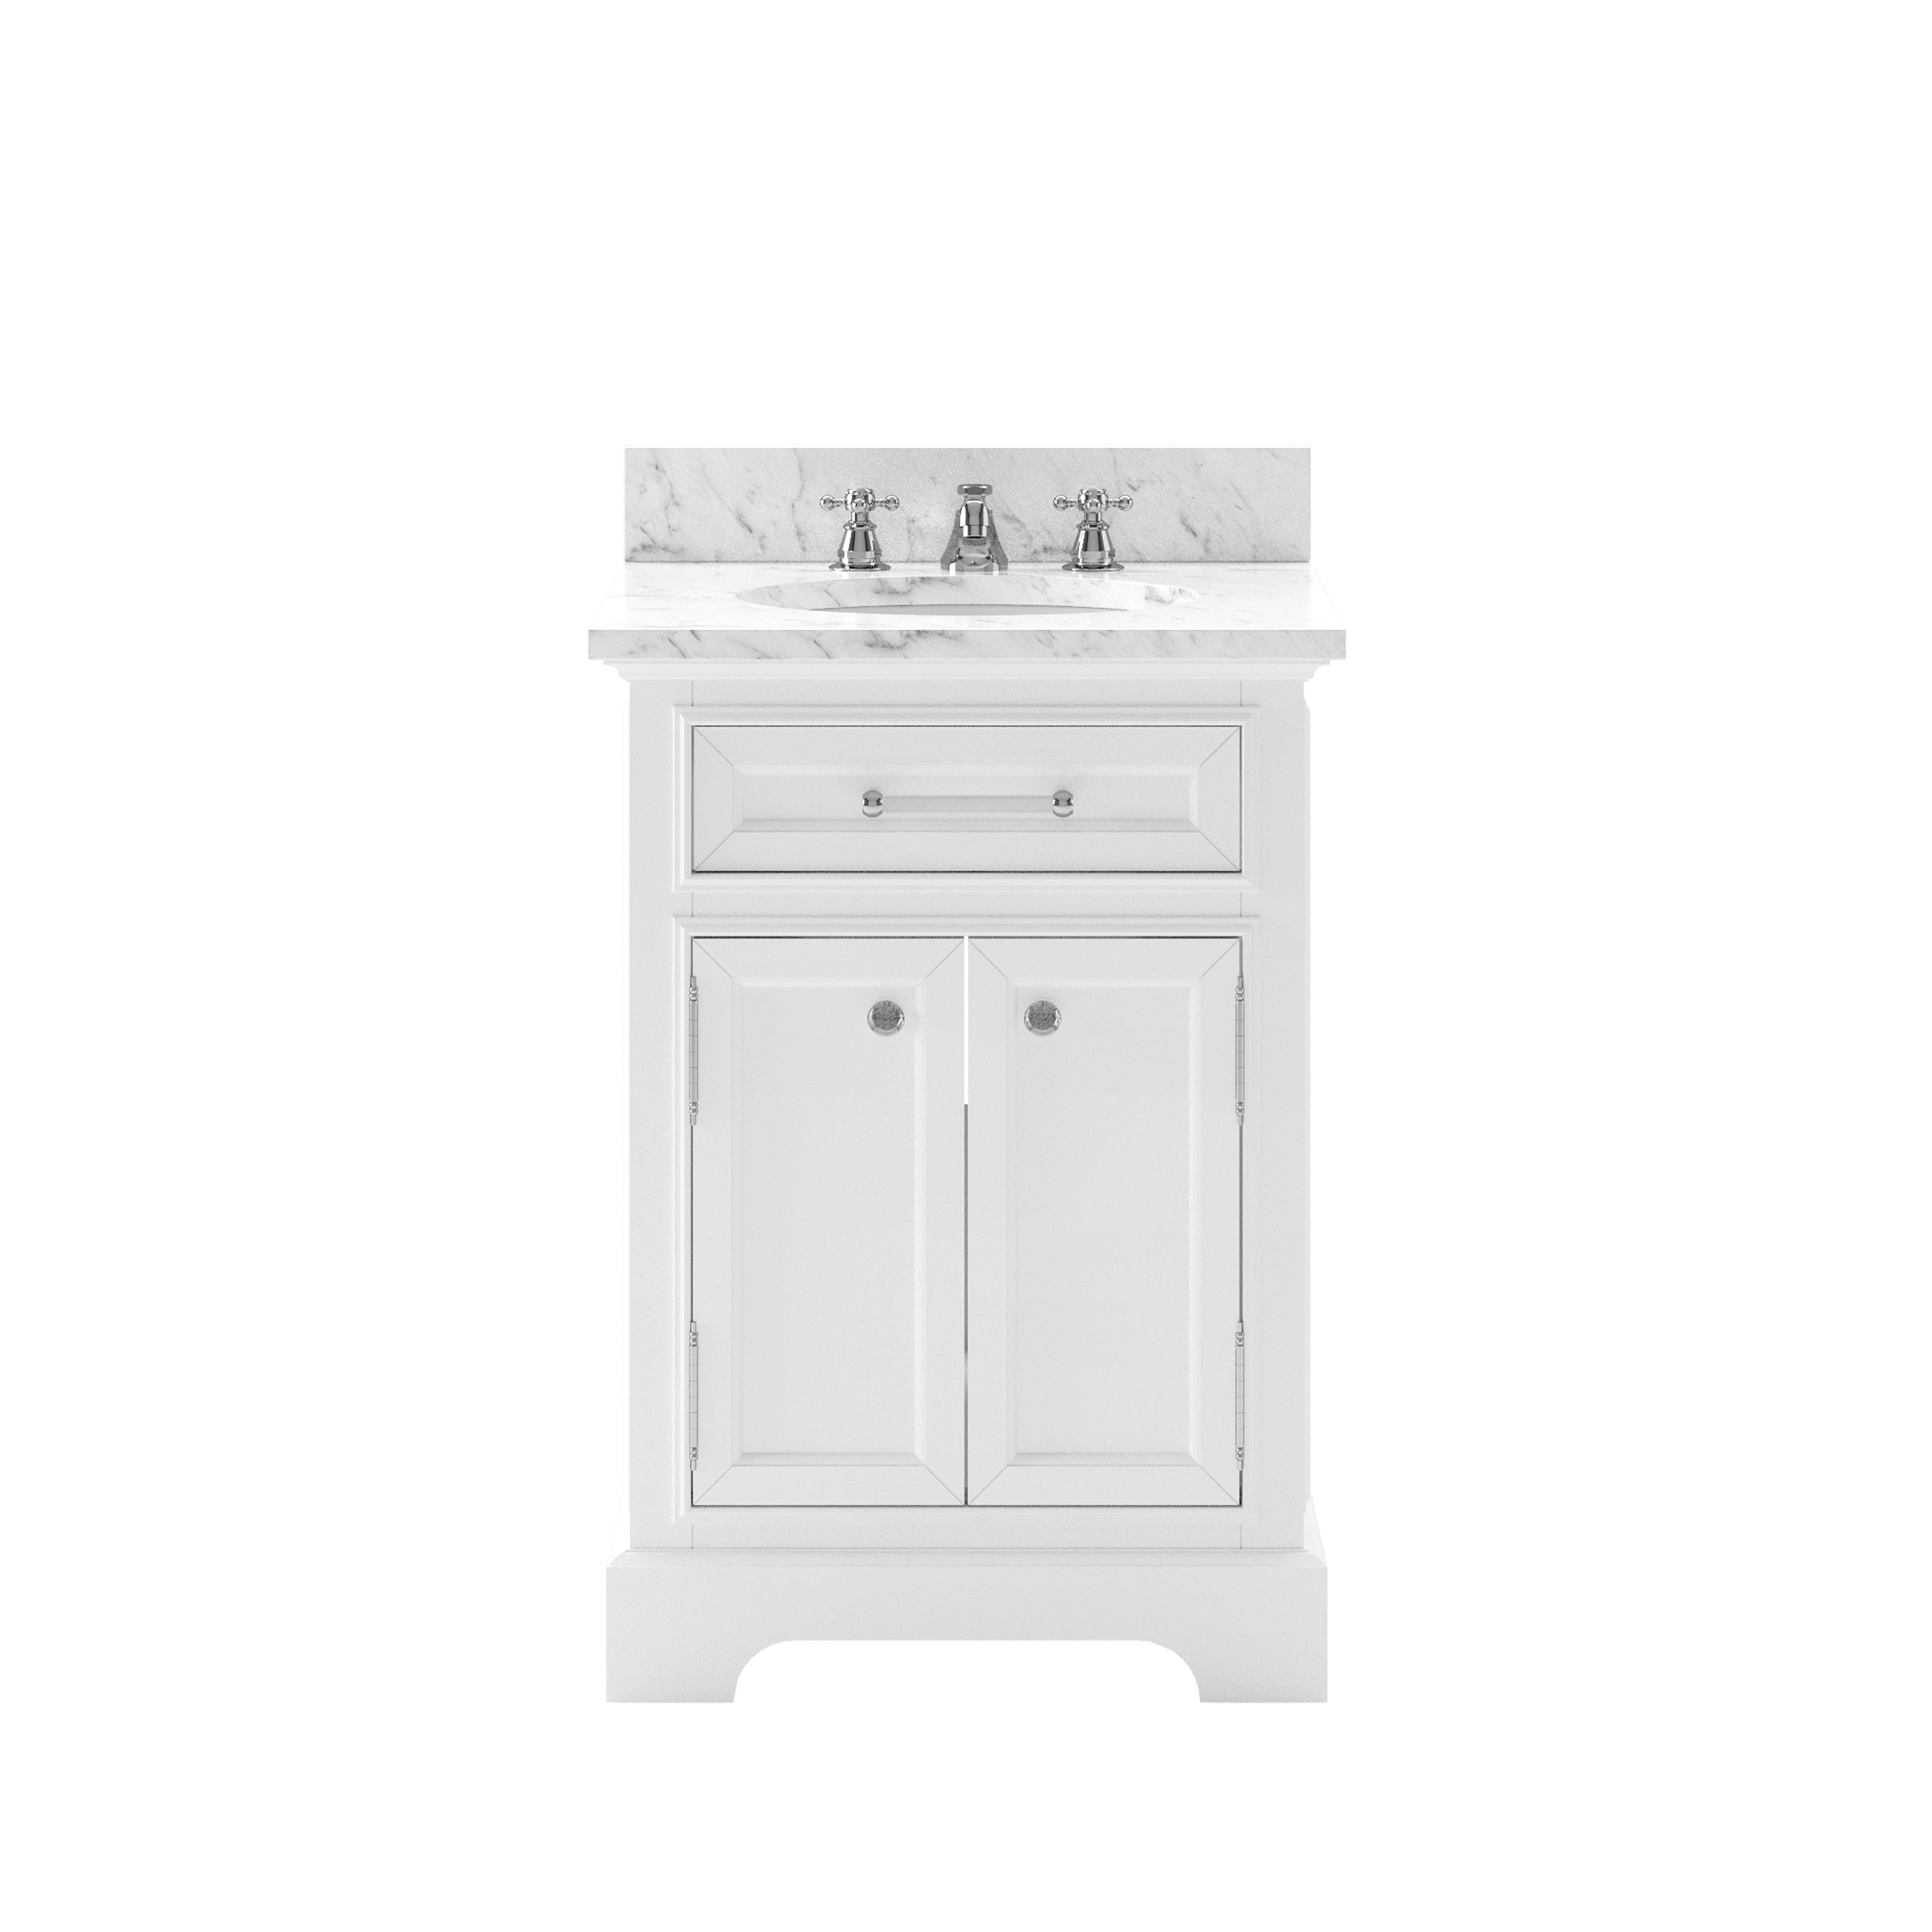 Water Creation | 24 Inch Pure White Single Sink Bathroom Vanity With Faucet From The Derby Collection | DE24CW01PW-000BX0901